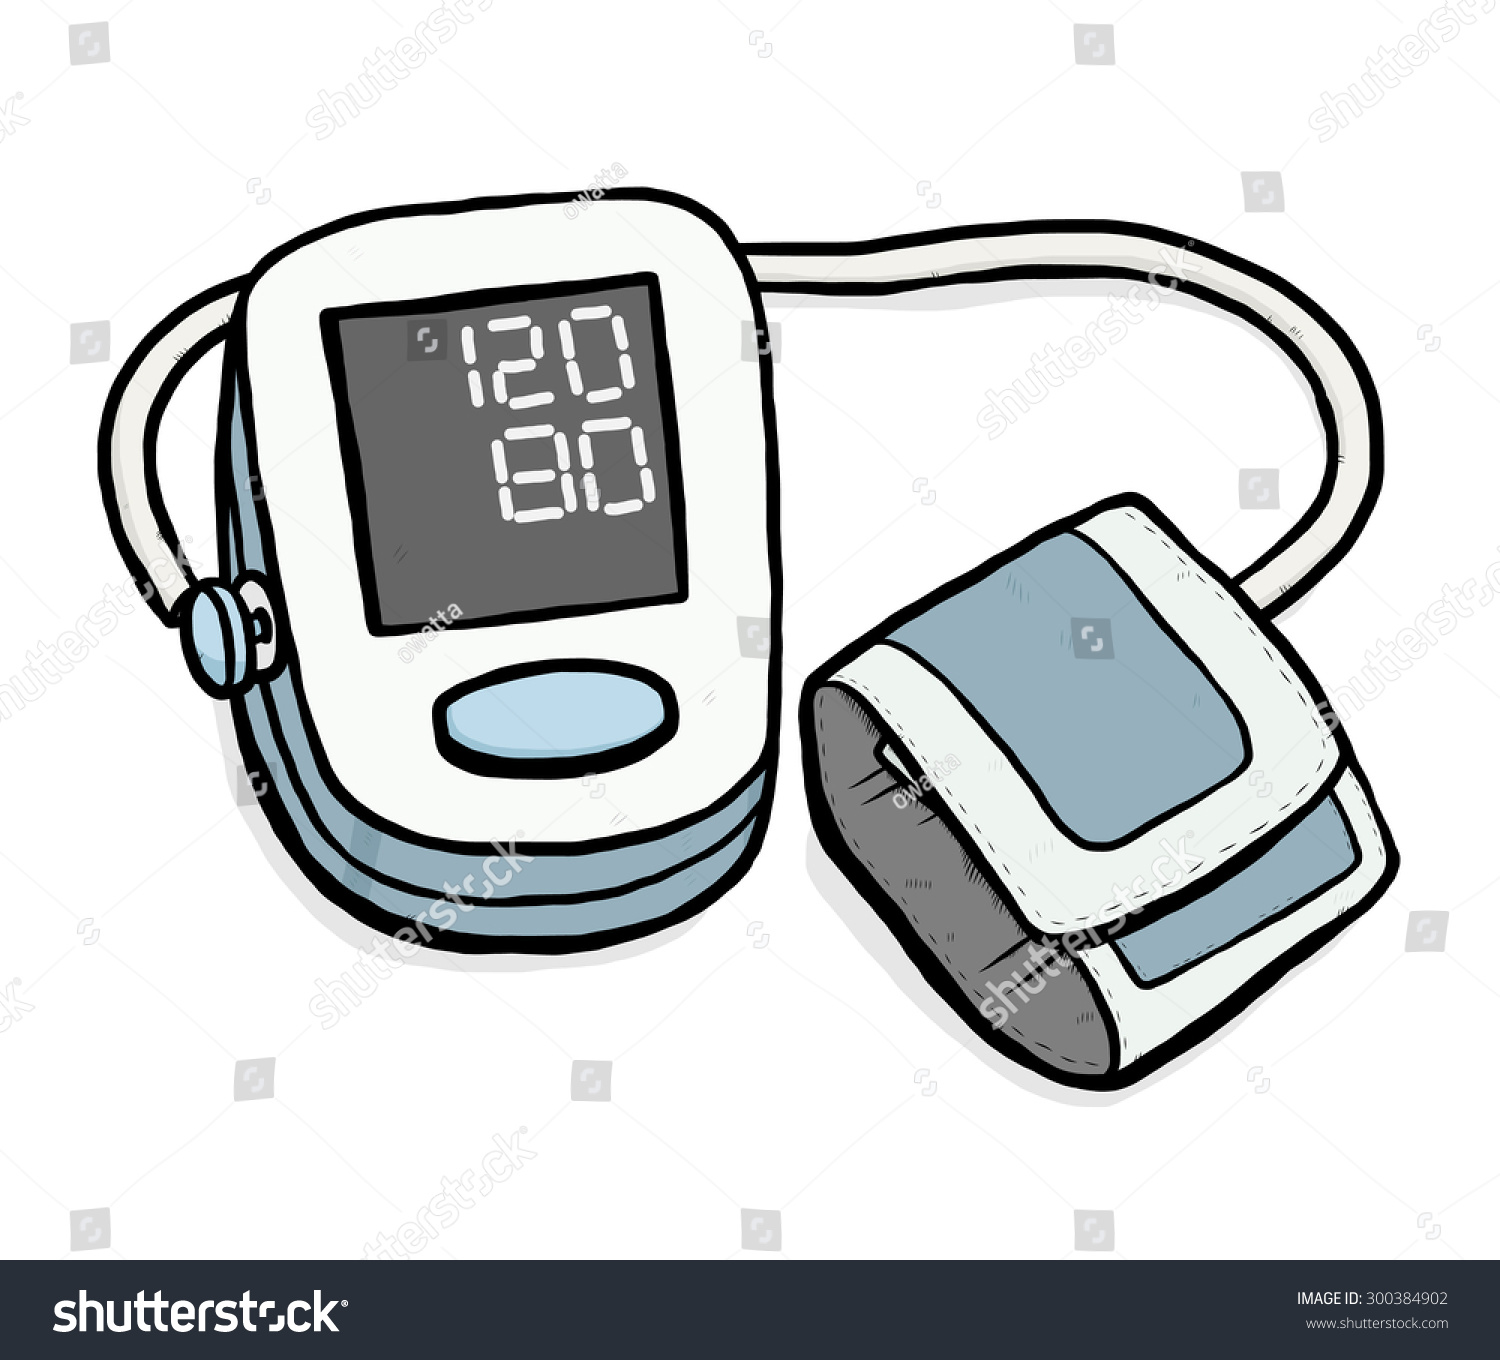 free clipart of blood pressure - photo #41